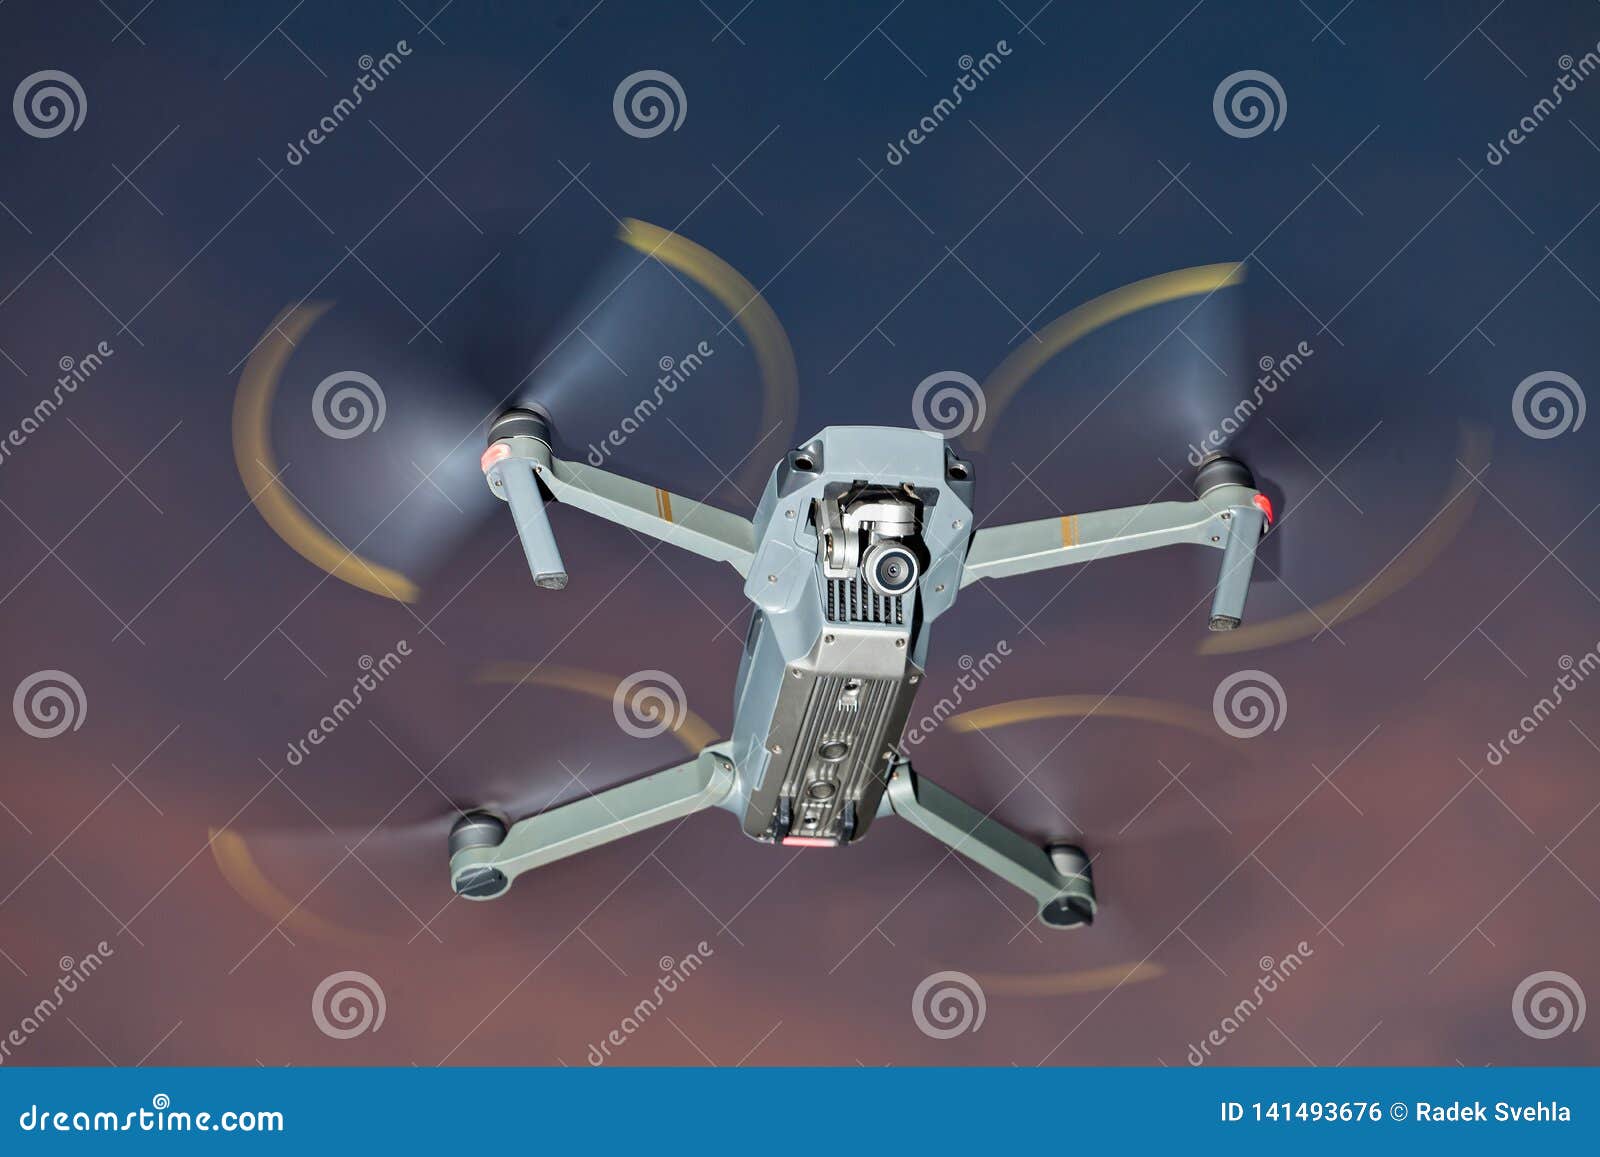 a shot of a flying dron